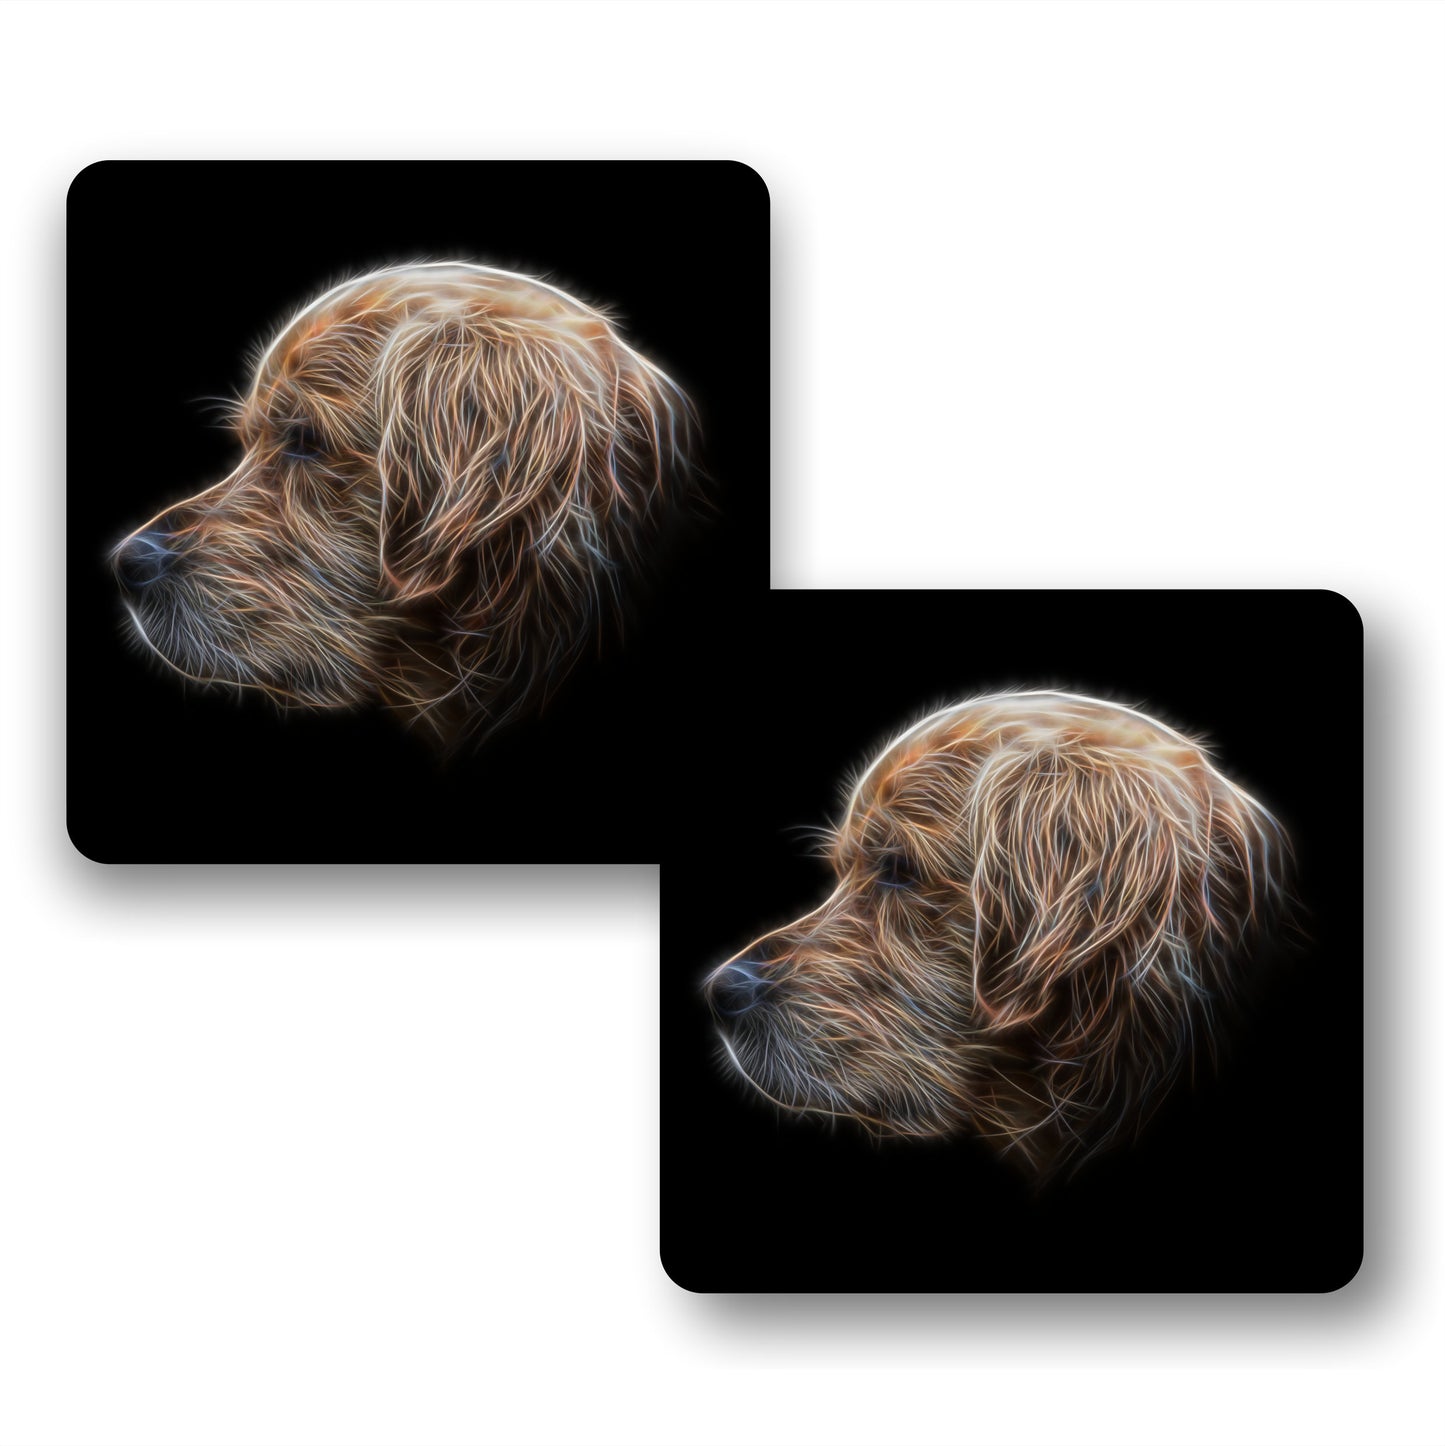 Golden Retriever Coasters, Set of 2, with Stunning Fractal Art Design. Perfect Owner Gift.